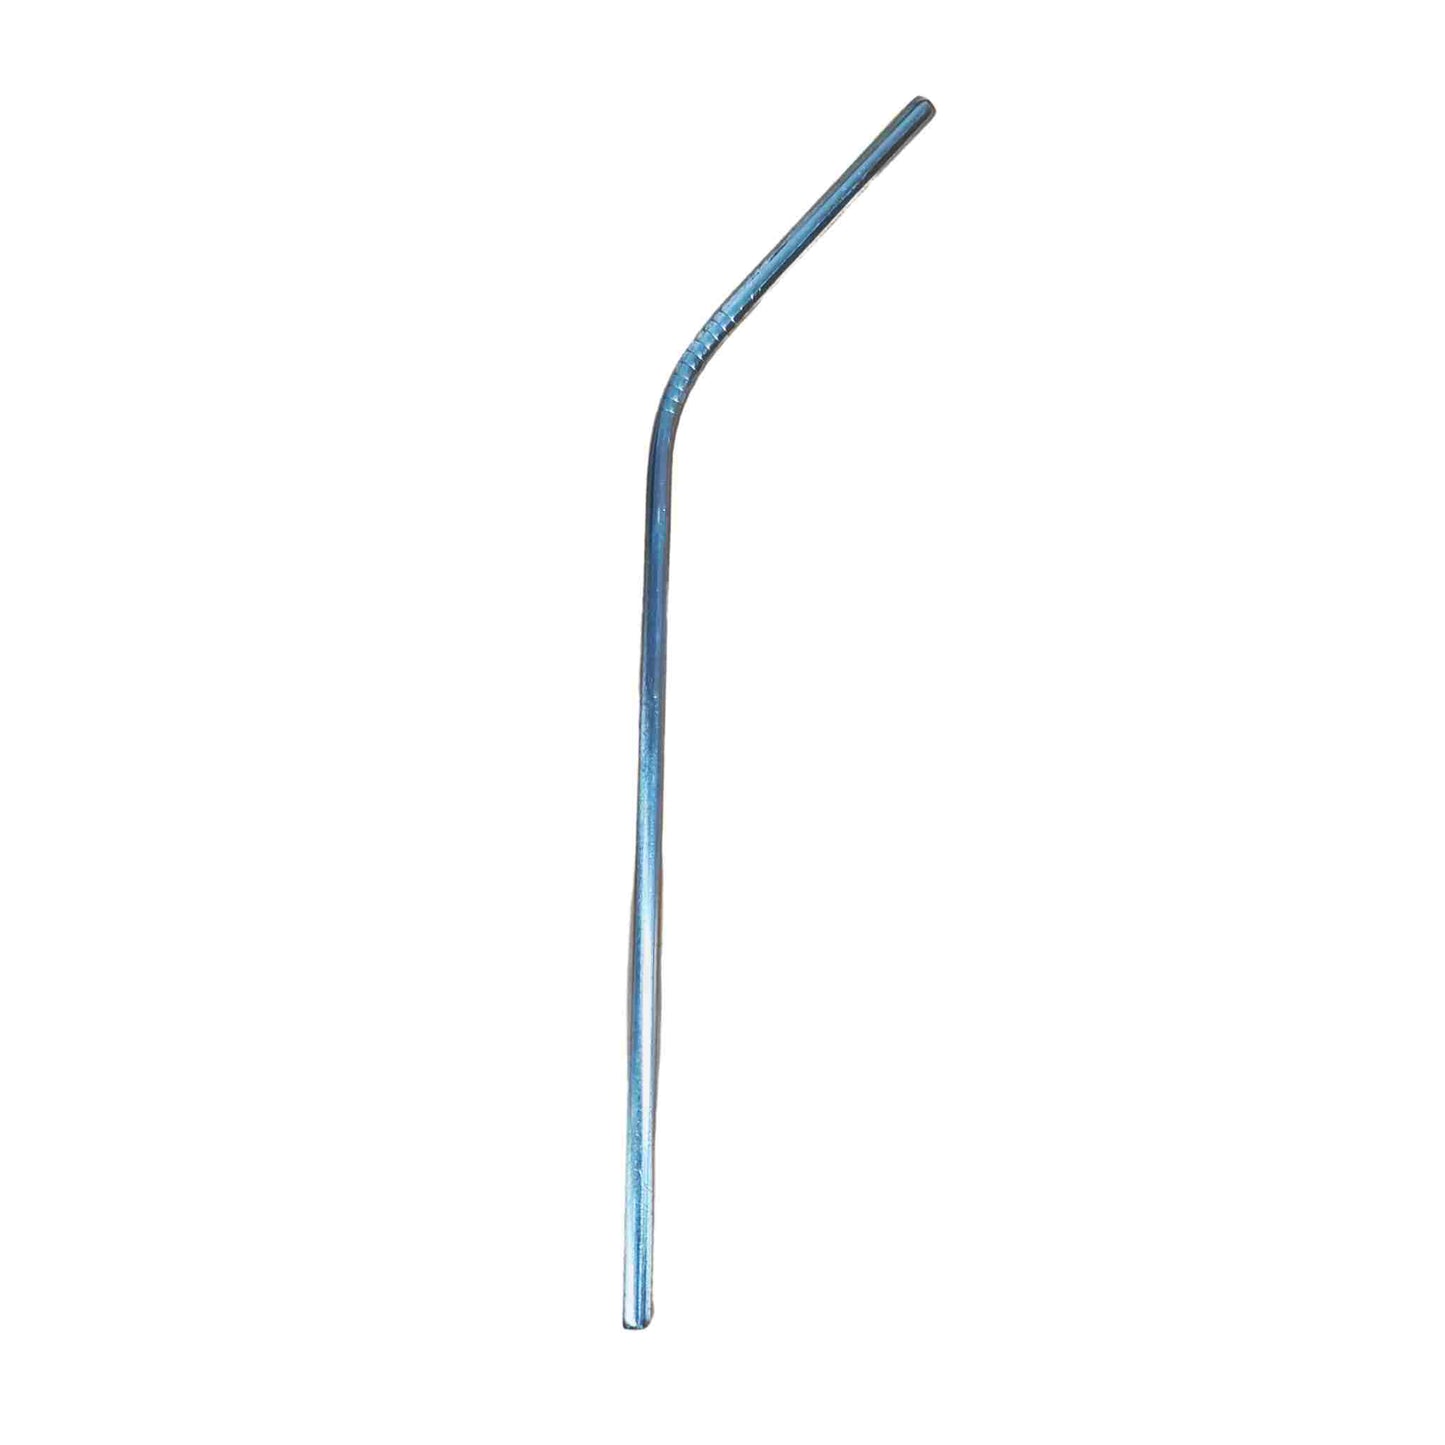 SipWise Deluxe Stainless Steel Straws, both straight and bent styles, displayed with a cocktail and soft drink, emphasizing sustainable and stylish drink companions